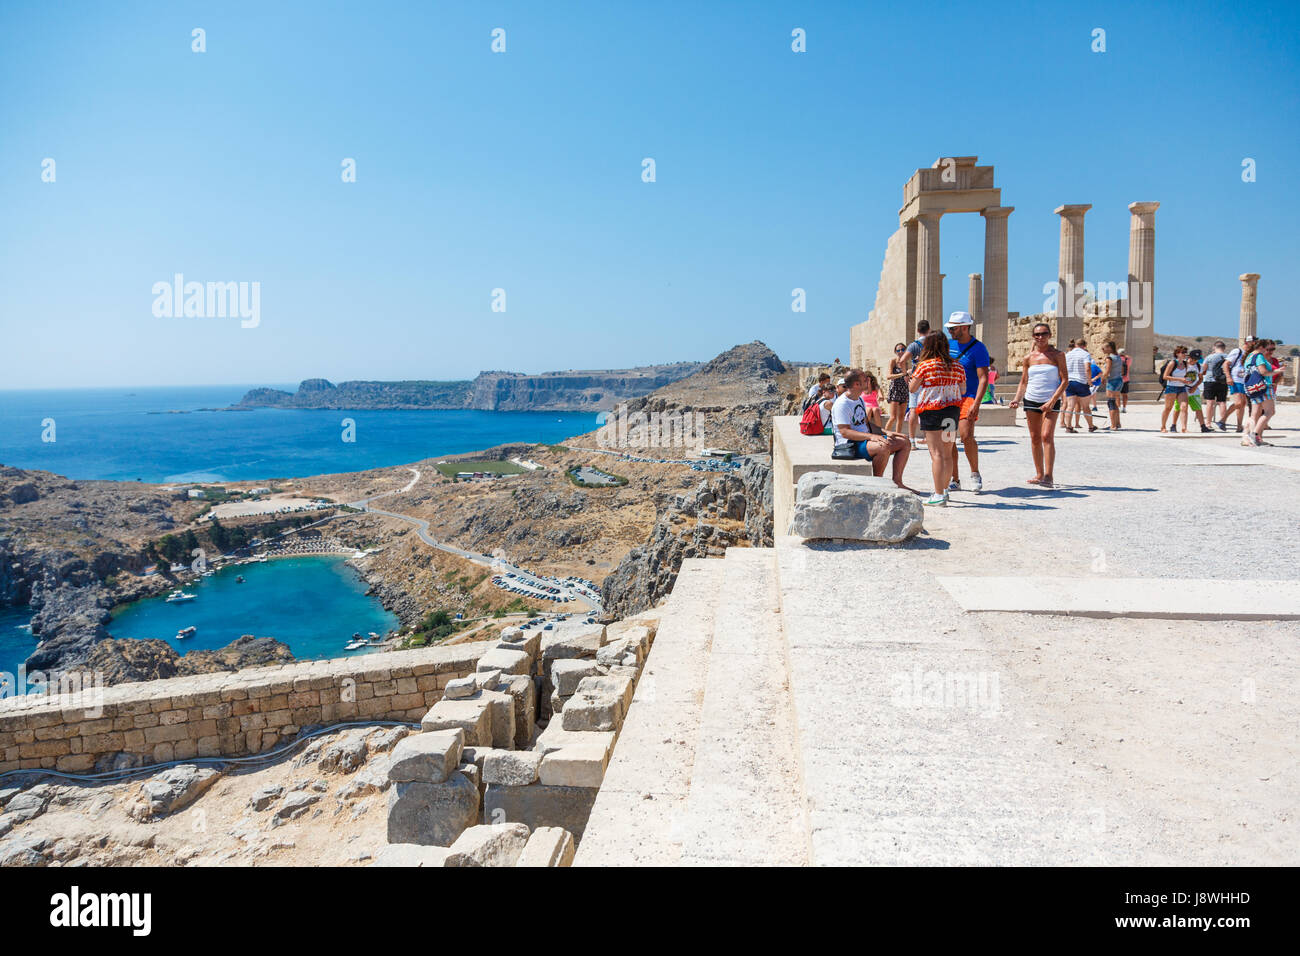 LINDOS, RHODES ISLAND, GREECE - September 3, 2015:  People visiting the ruins of a Doric temple of Athena Lindia on the Acropolis of Lindos, observing Stock Photo